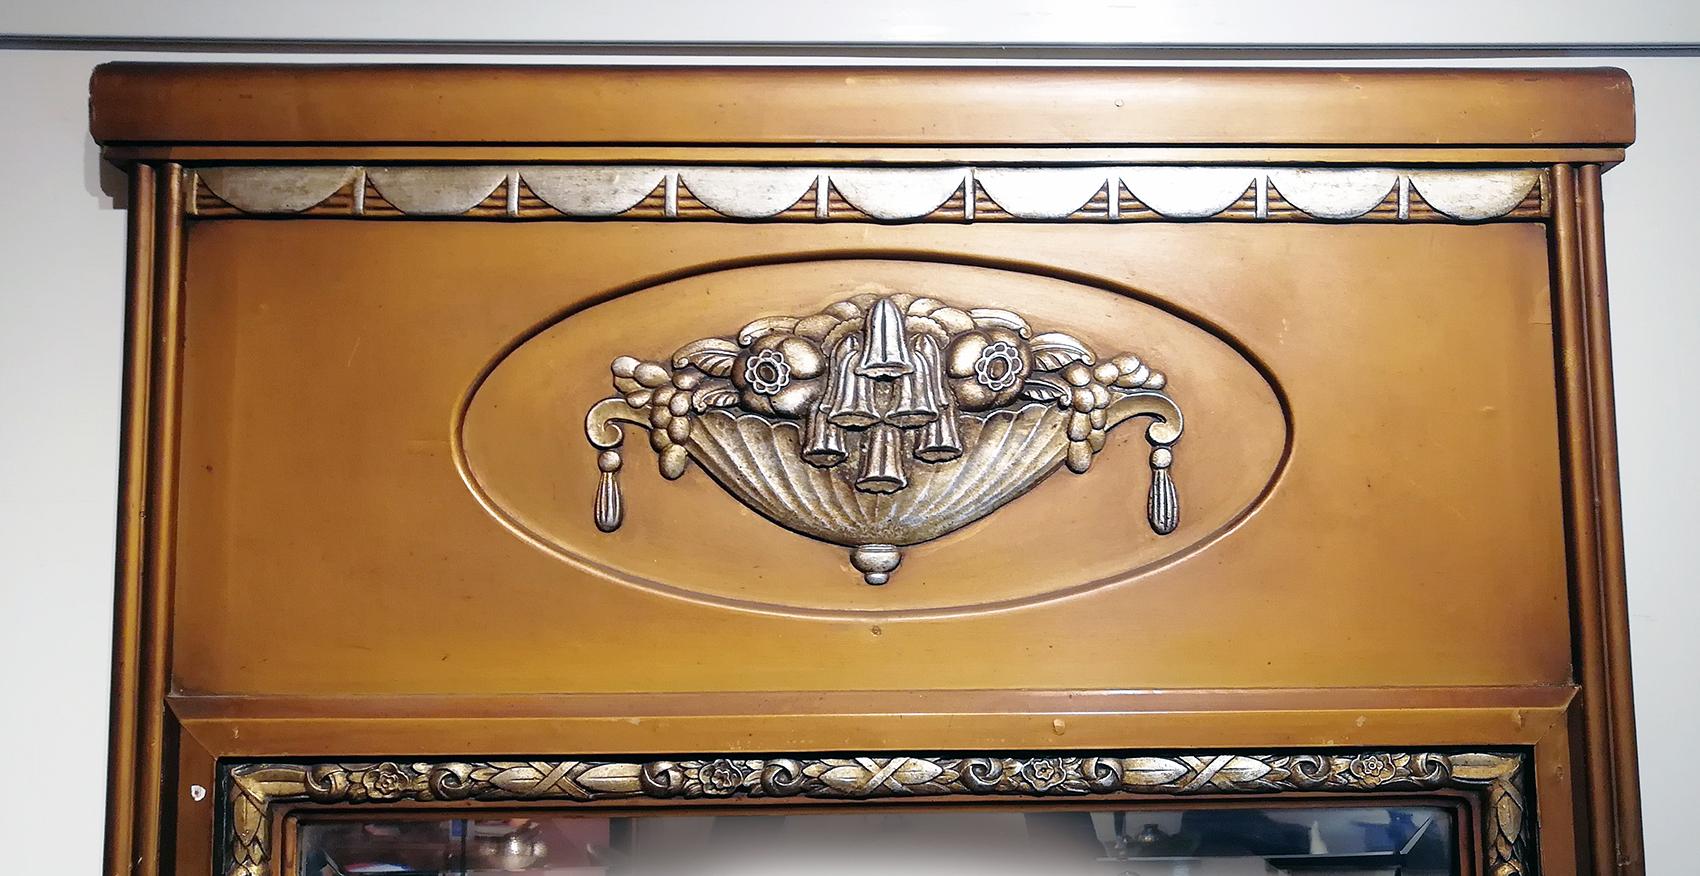 Large French Art Deco wall mirror made of wood and mirror with gilt frame and etched decorative silver flower basket in the upper section. The mirror is surrounded by silver floral motif design on three of its sides.